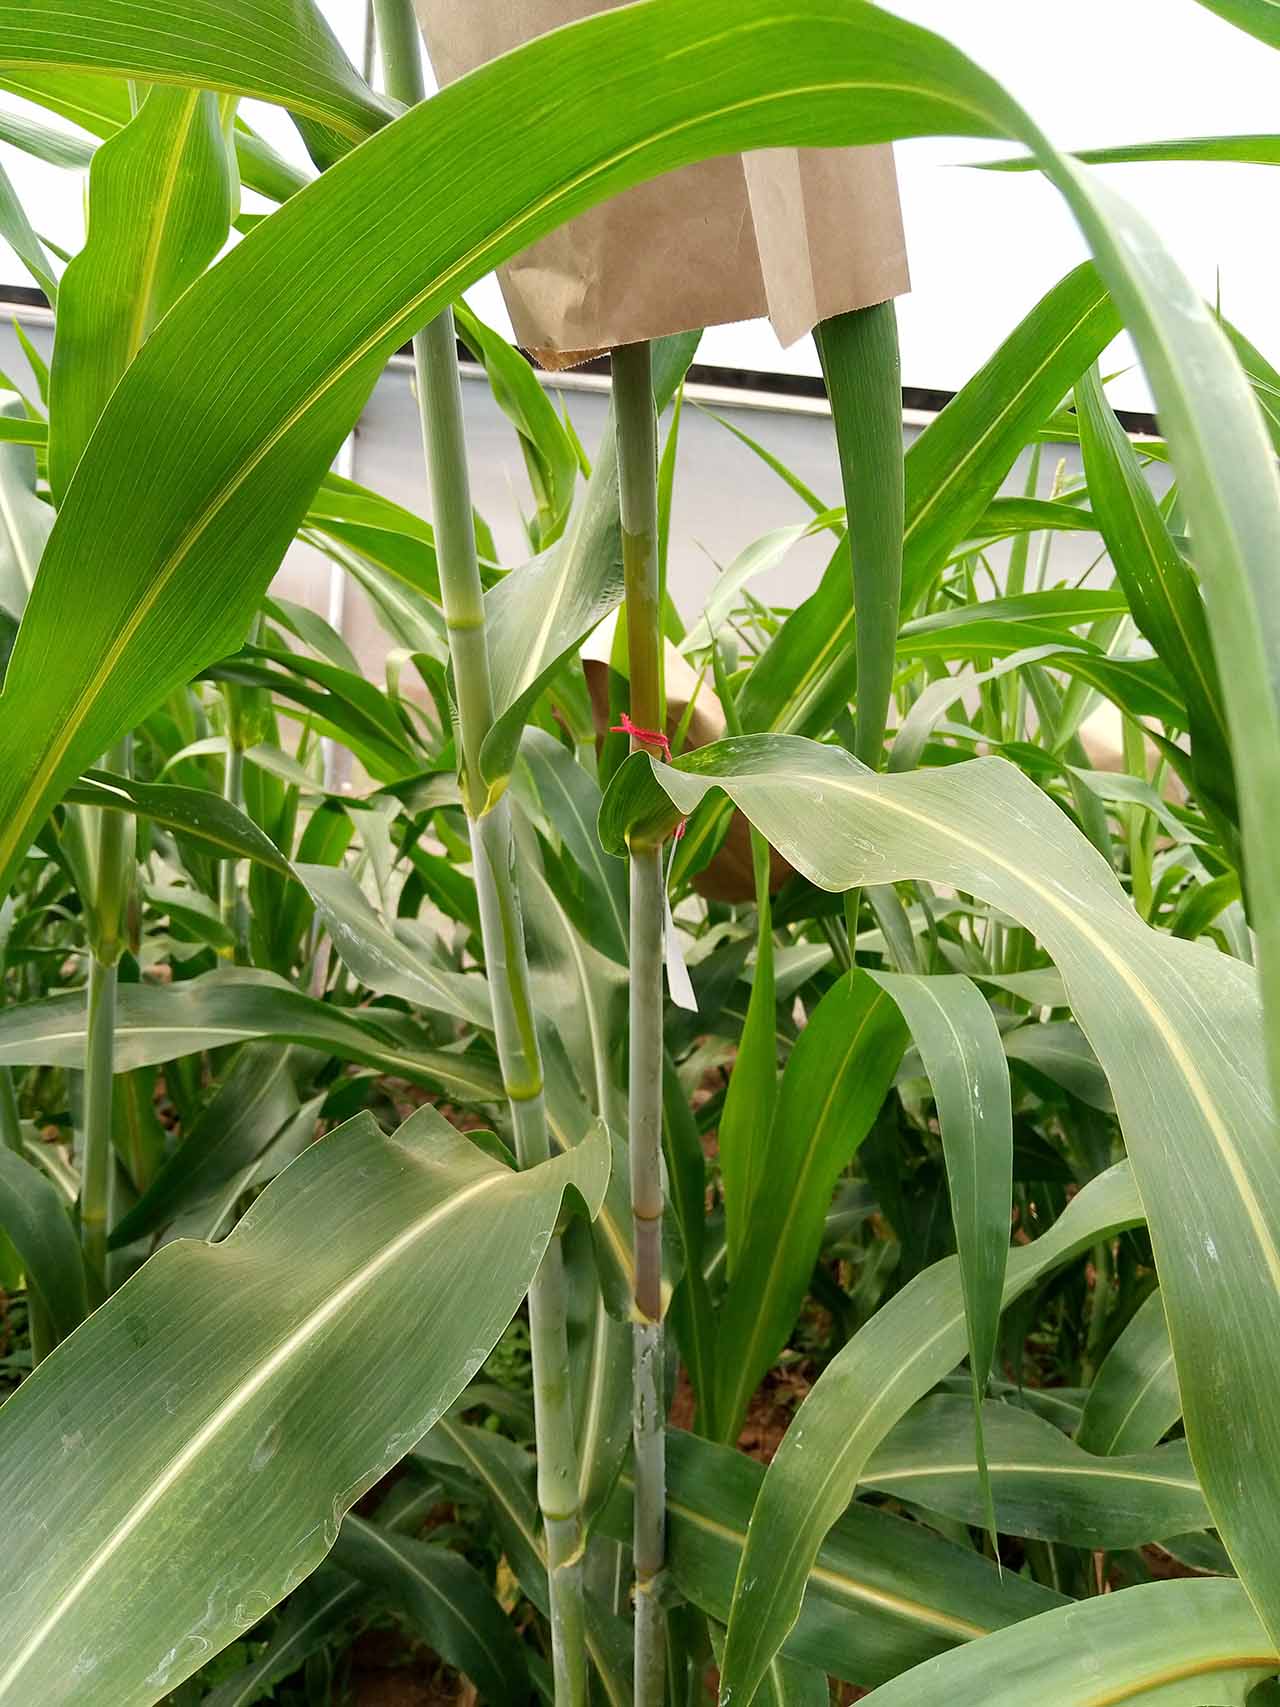 Current work: developing fodder sorghum with three traits combined – sugar-rich stalk, low lignin and stay green Segregating population at F2